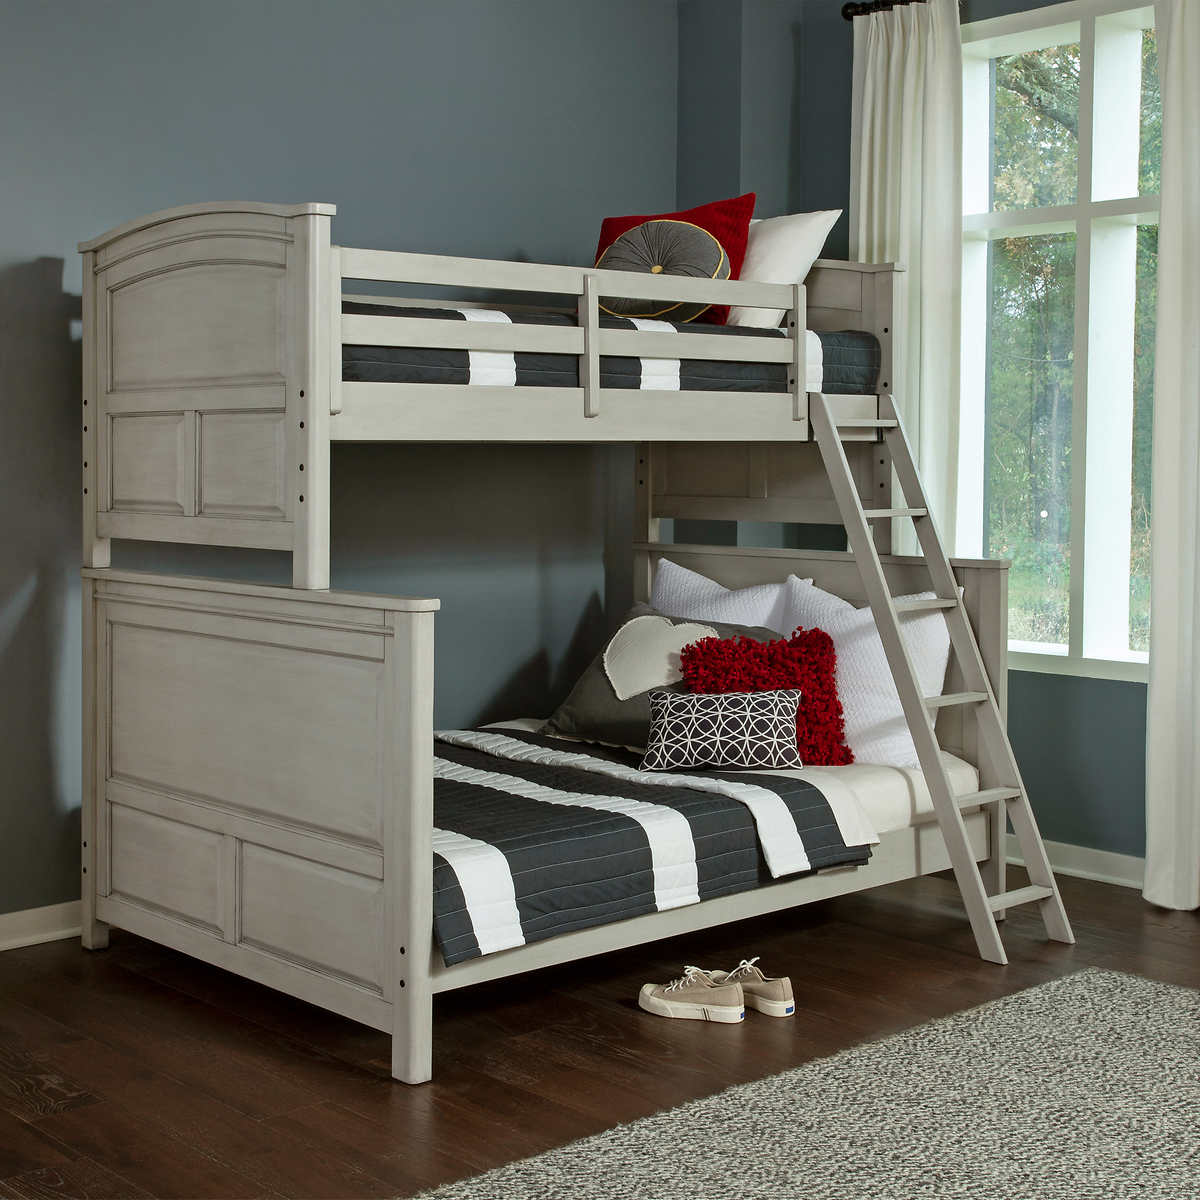 Wingate Twin Over Double Bunk Costco, Bunk Beds That Separate Into Twin Beds